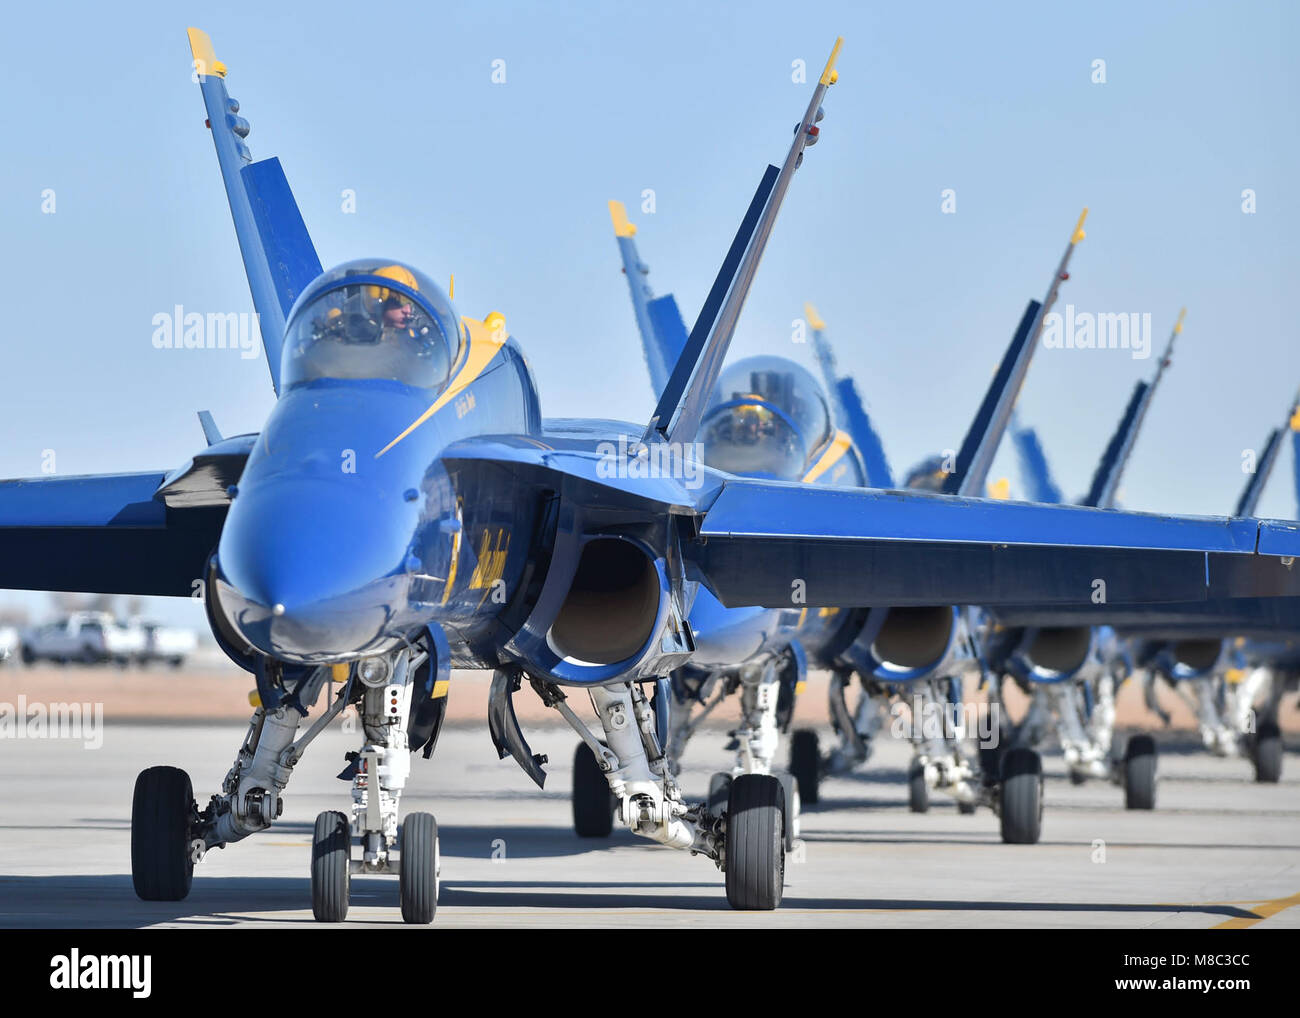 NAF EL CENTRO, Calif. (Feb. 24, 2018) The Blue Angels Delta taxis onto the flightline following a practice demonstration. The Blue Angels are scheduled to perform more than 60 demonstrations at more than 30 locations across the U.S. in 2018. (U.S. Navy Stock Photo